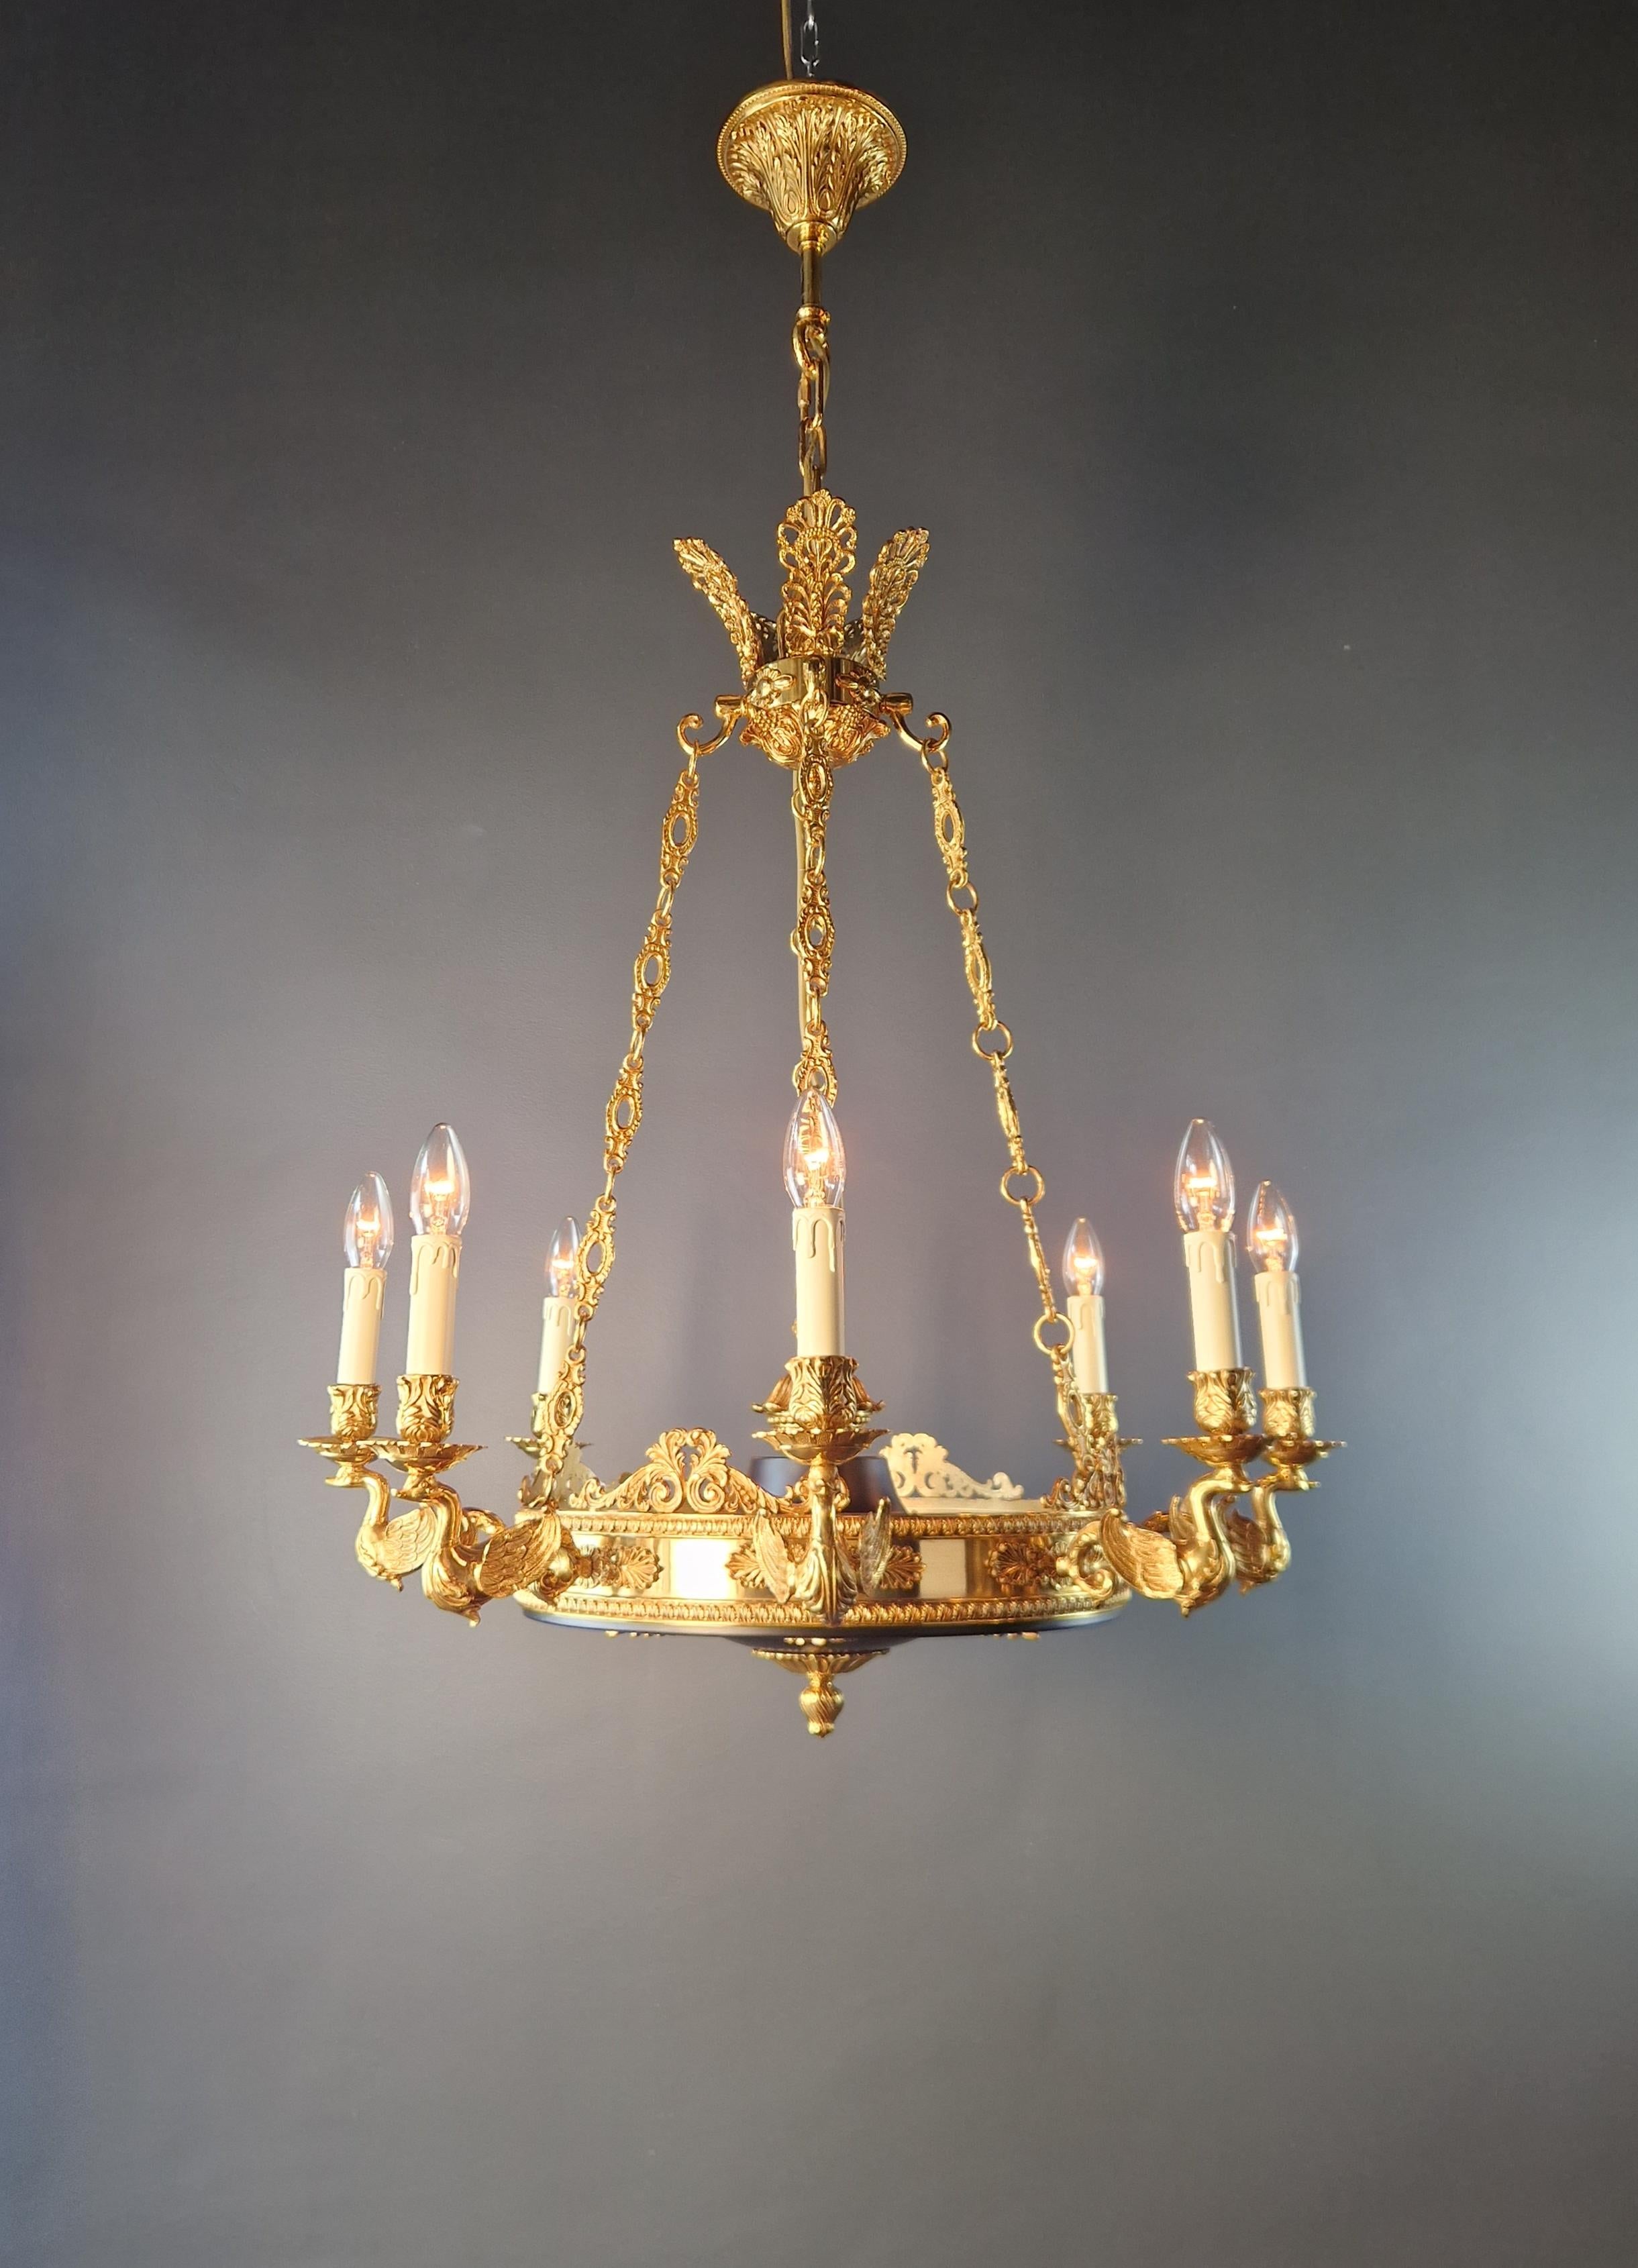 Introducing a stunning Brass Baroque Empire  Chandelier, reminiscent of the classical style of the Empire era. This is a new reproduction, and several are available, ensuring you can bring this classic beauty to your space.

Measuring a total height